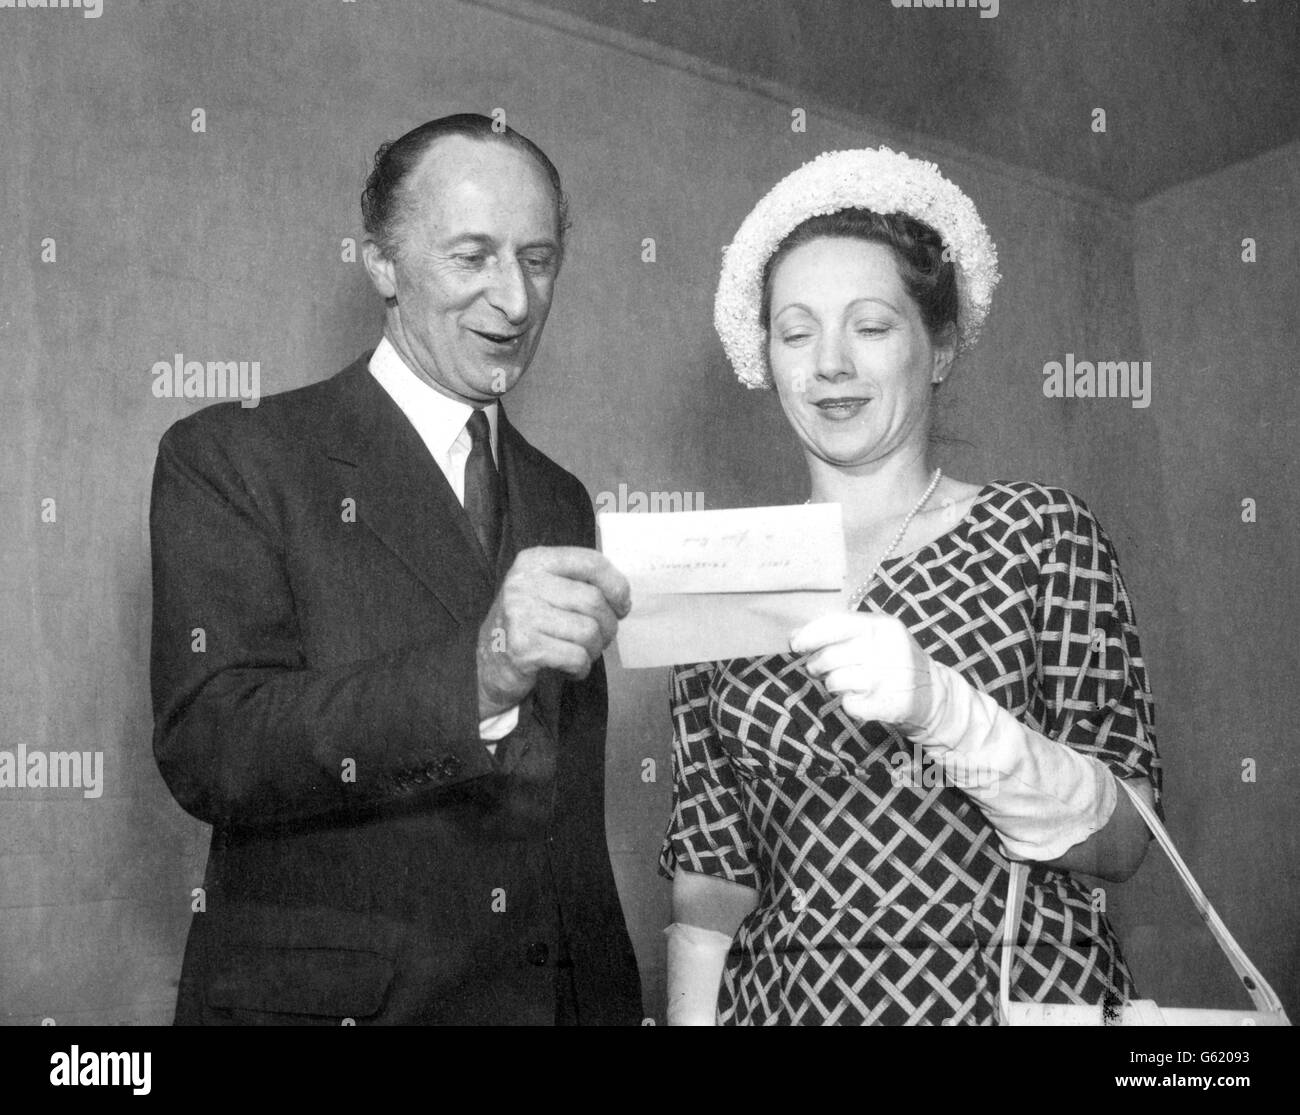 1,000 winning number in the second of the Government's Premium Bond draws at Lytham St Anne's in Lancashire. Stock Photo